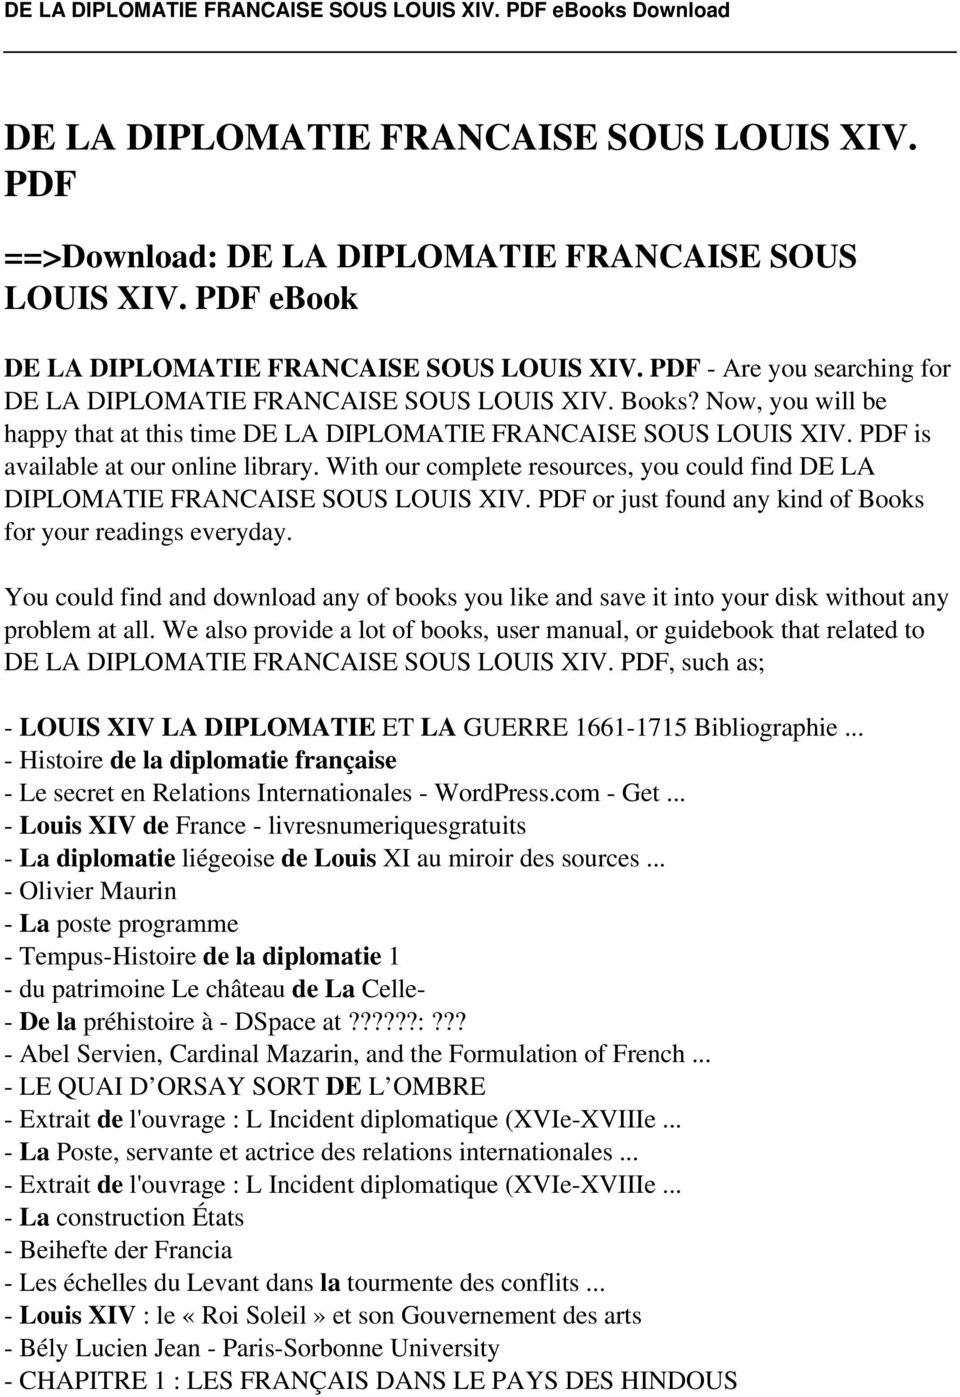 PDF is available at our online library. With our complete resources, you could find DE LA DIPLOMATIE FRANCAISE SOUS LOUIS XIV. PDF or just found any kind of Books for your readings everyday.